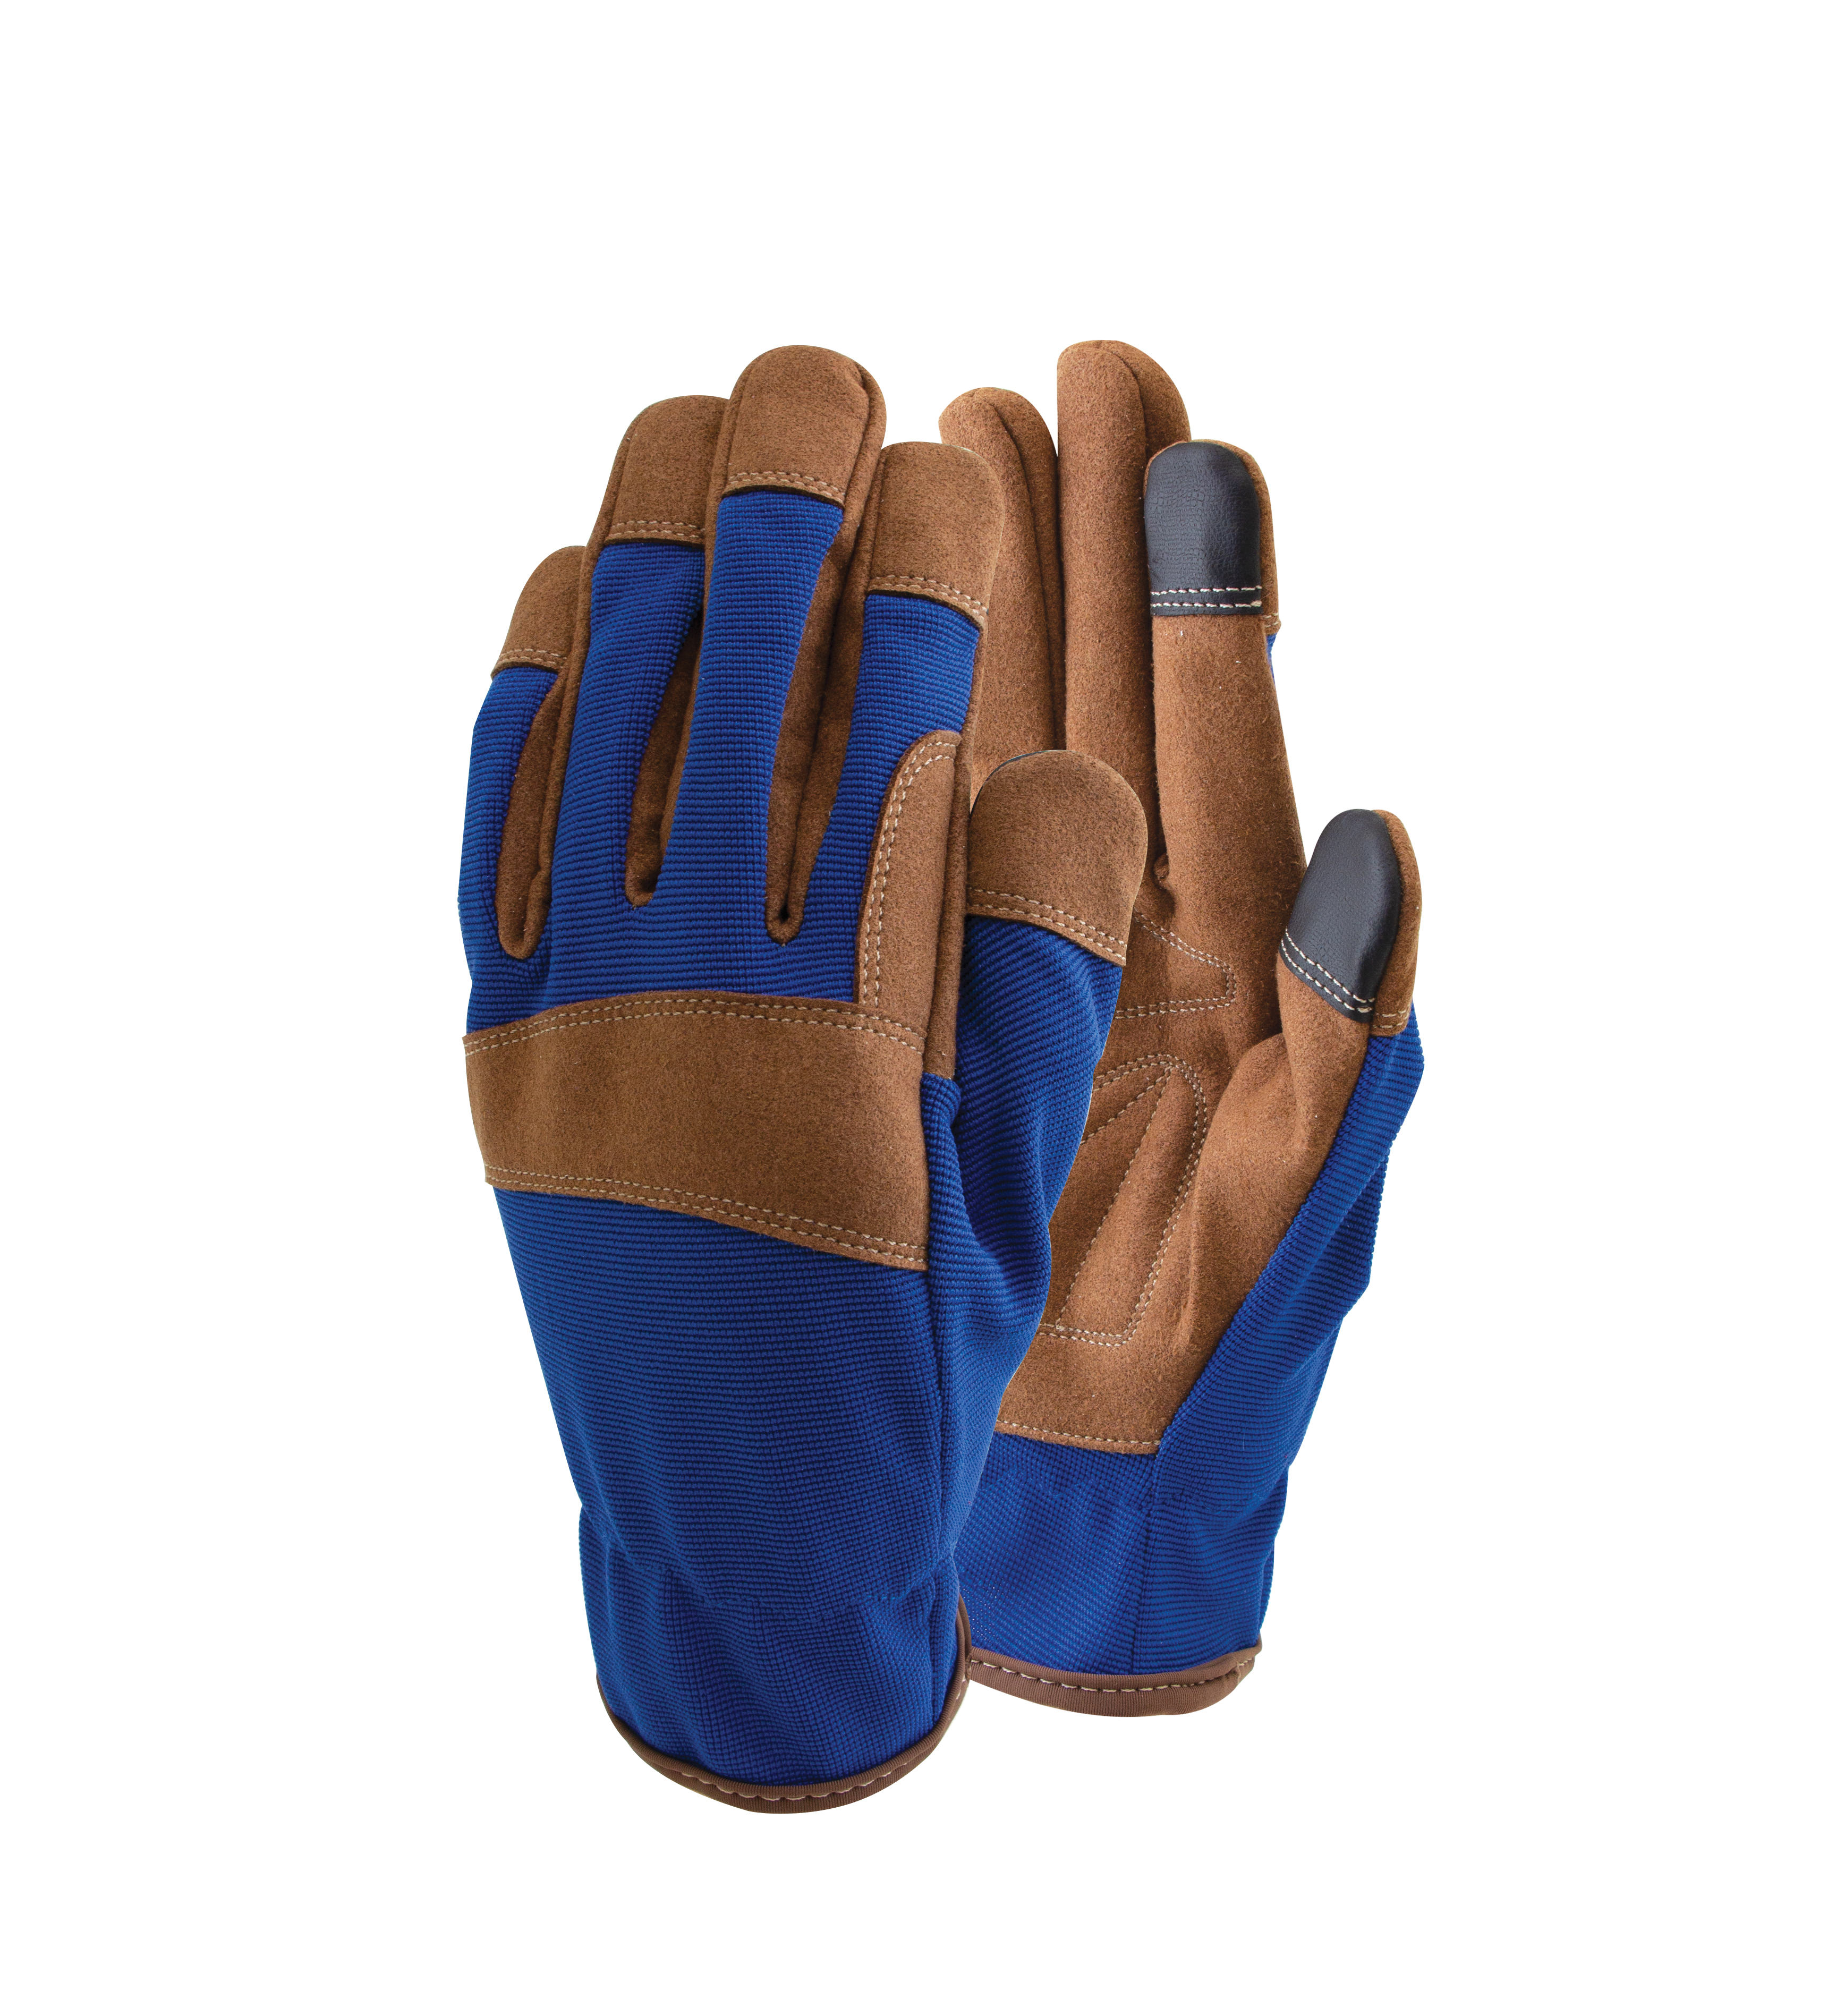 Town & Country TGL114 Deluxe Premium Leather & Suede Gloves 